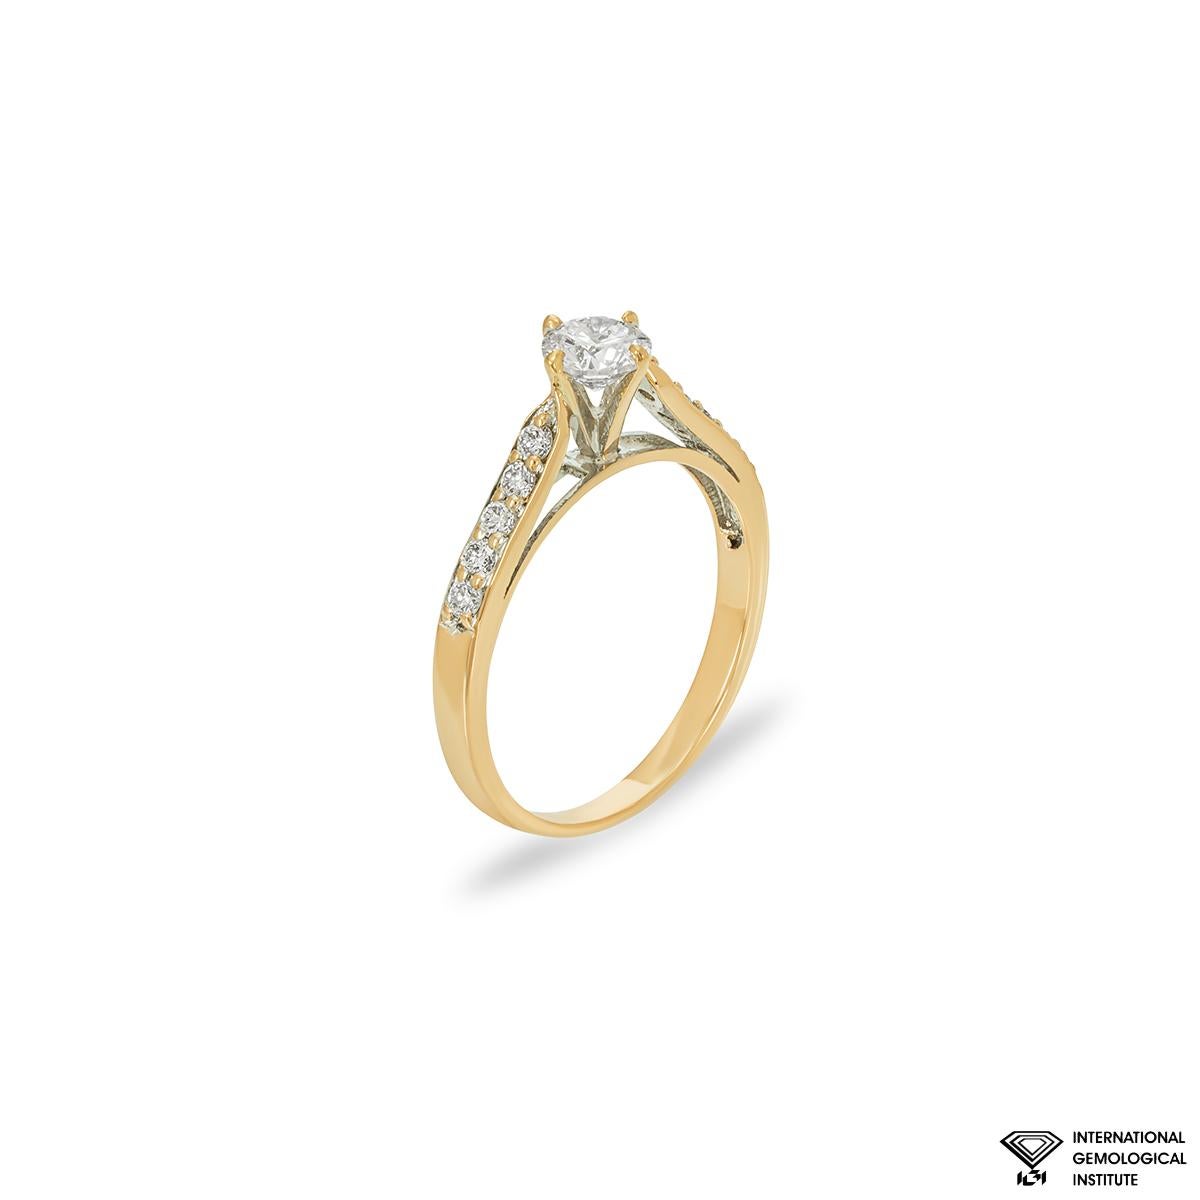 An alluring 18k yellow gold diamond engagement ring. The ring is set to the centre with a round brilliant cut diamond weighing 0.52ct, faint pink colour and SI2 clarity. The centre diamond is complemented by 10 round brilliant cut diamonds set to